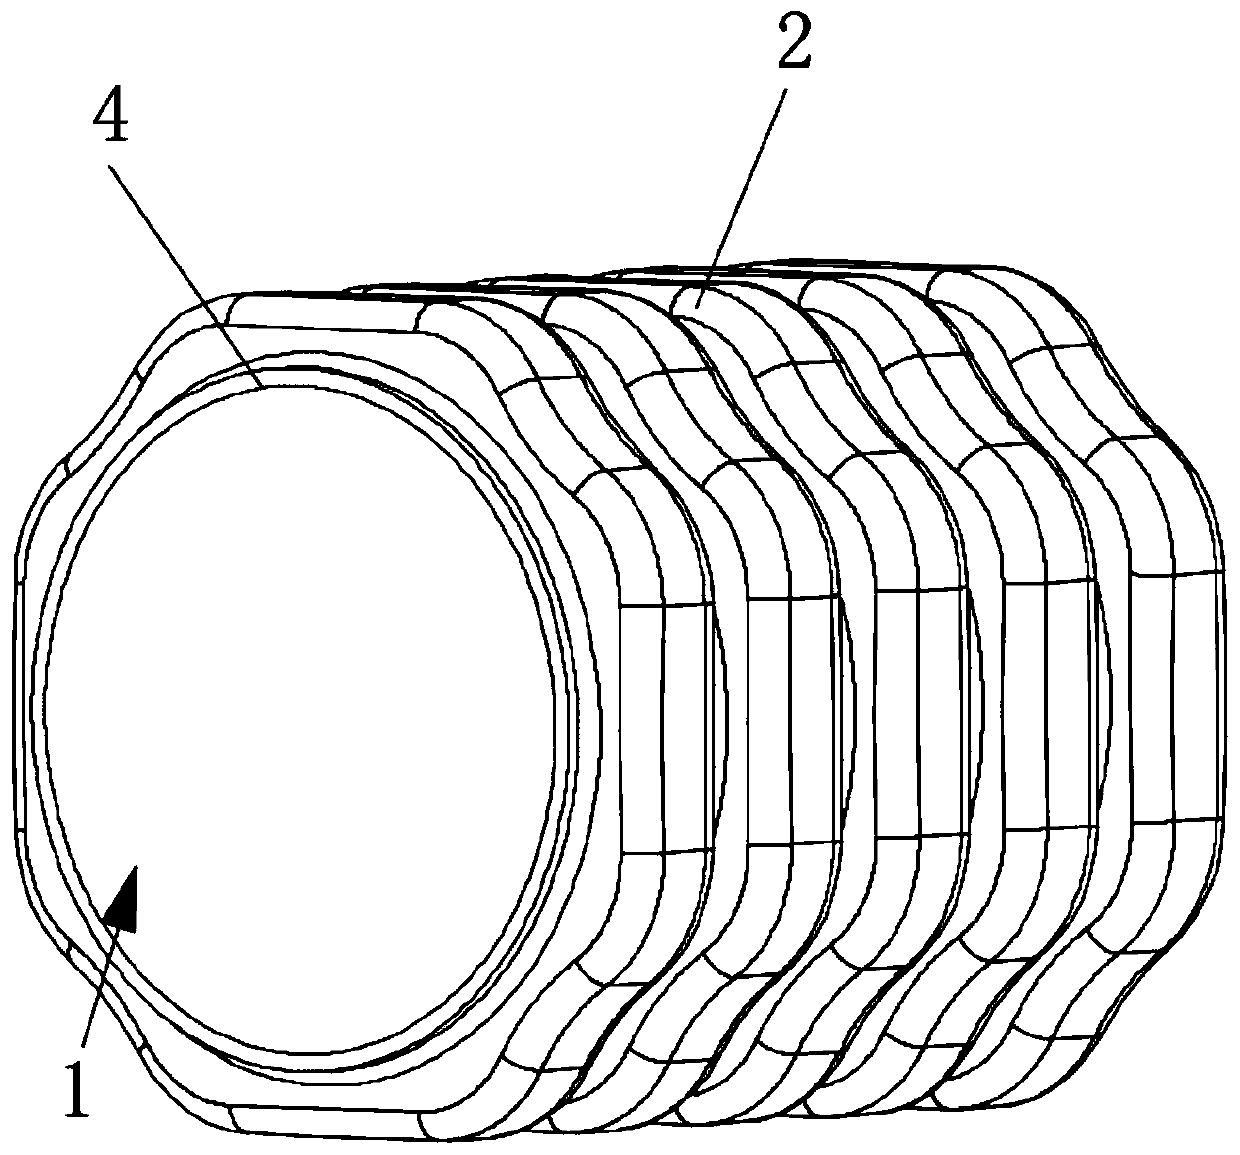 High-impact-resistance pillow-shaped composite sleeve and sleeve assembly